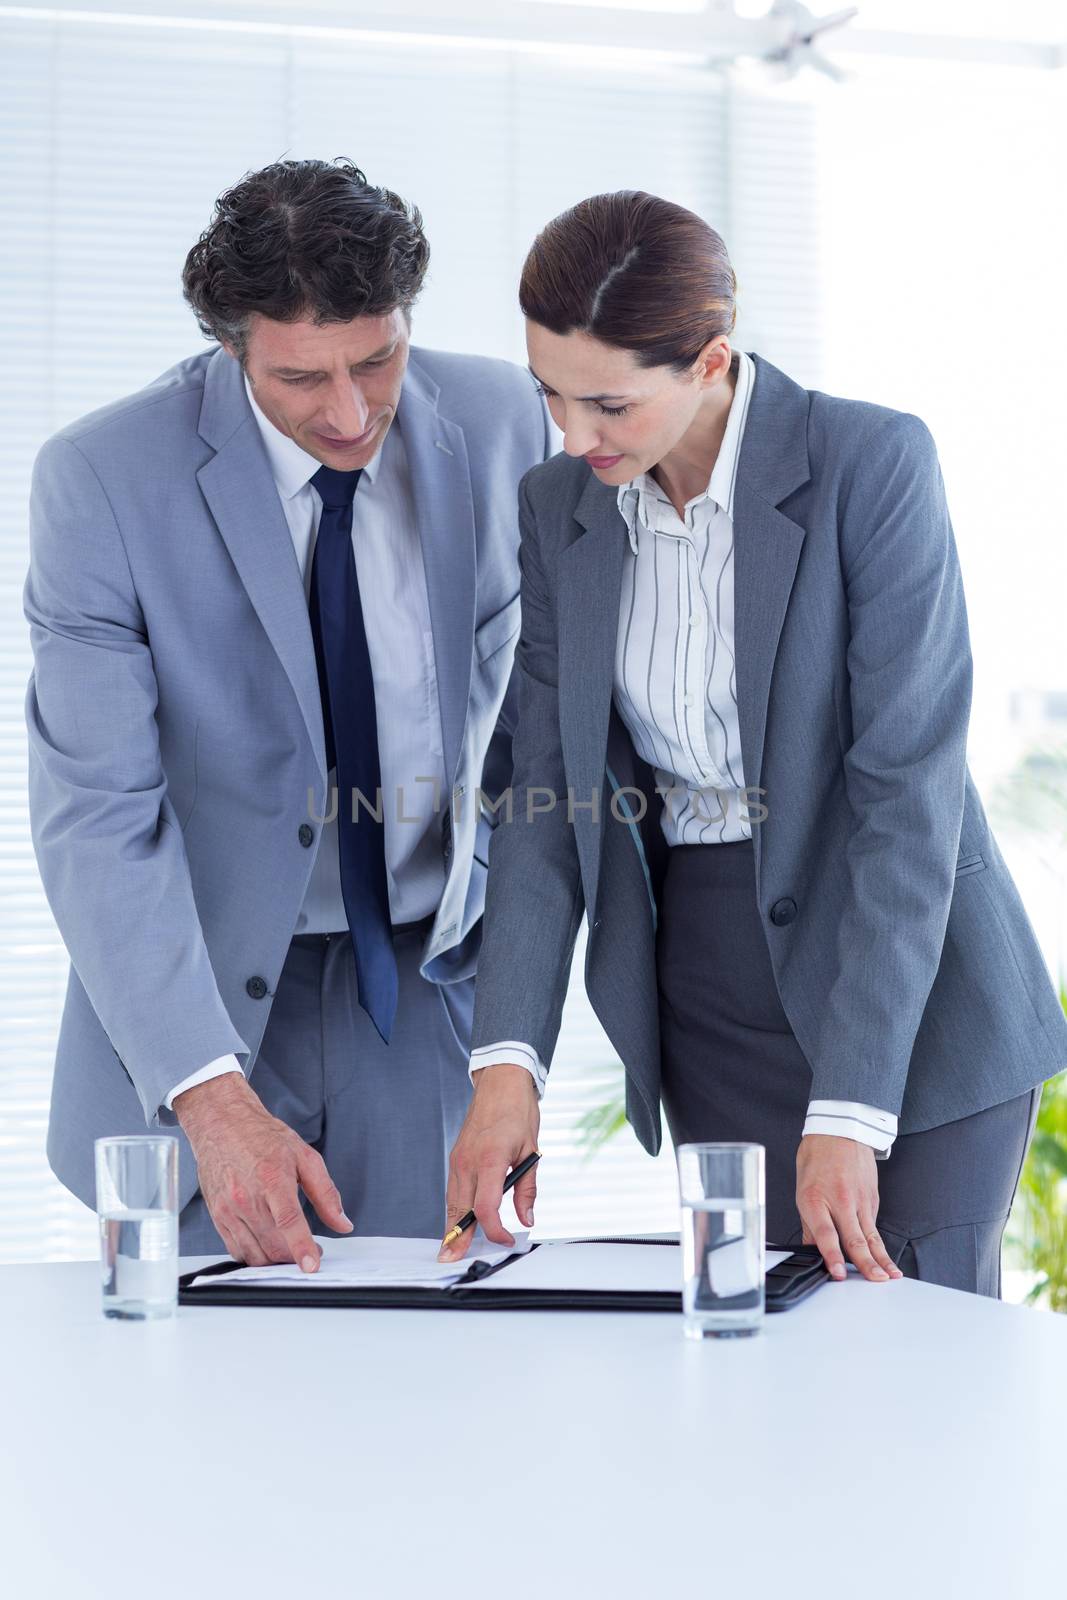 Business people checking file in an office